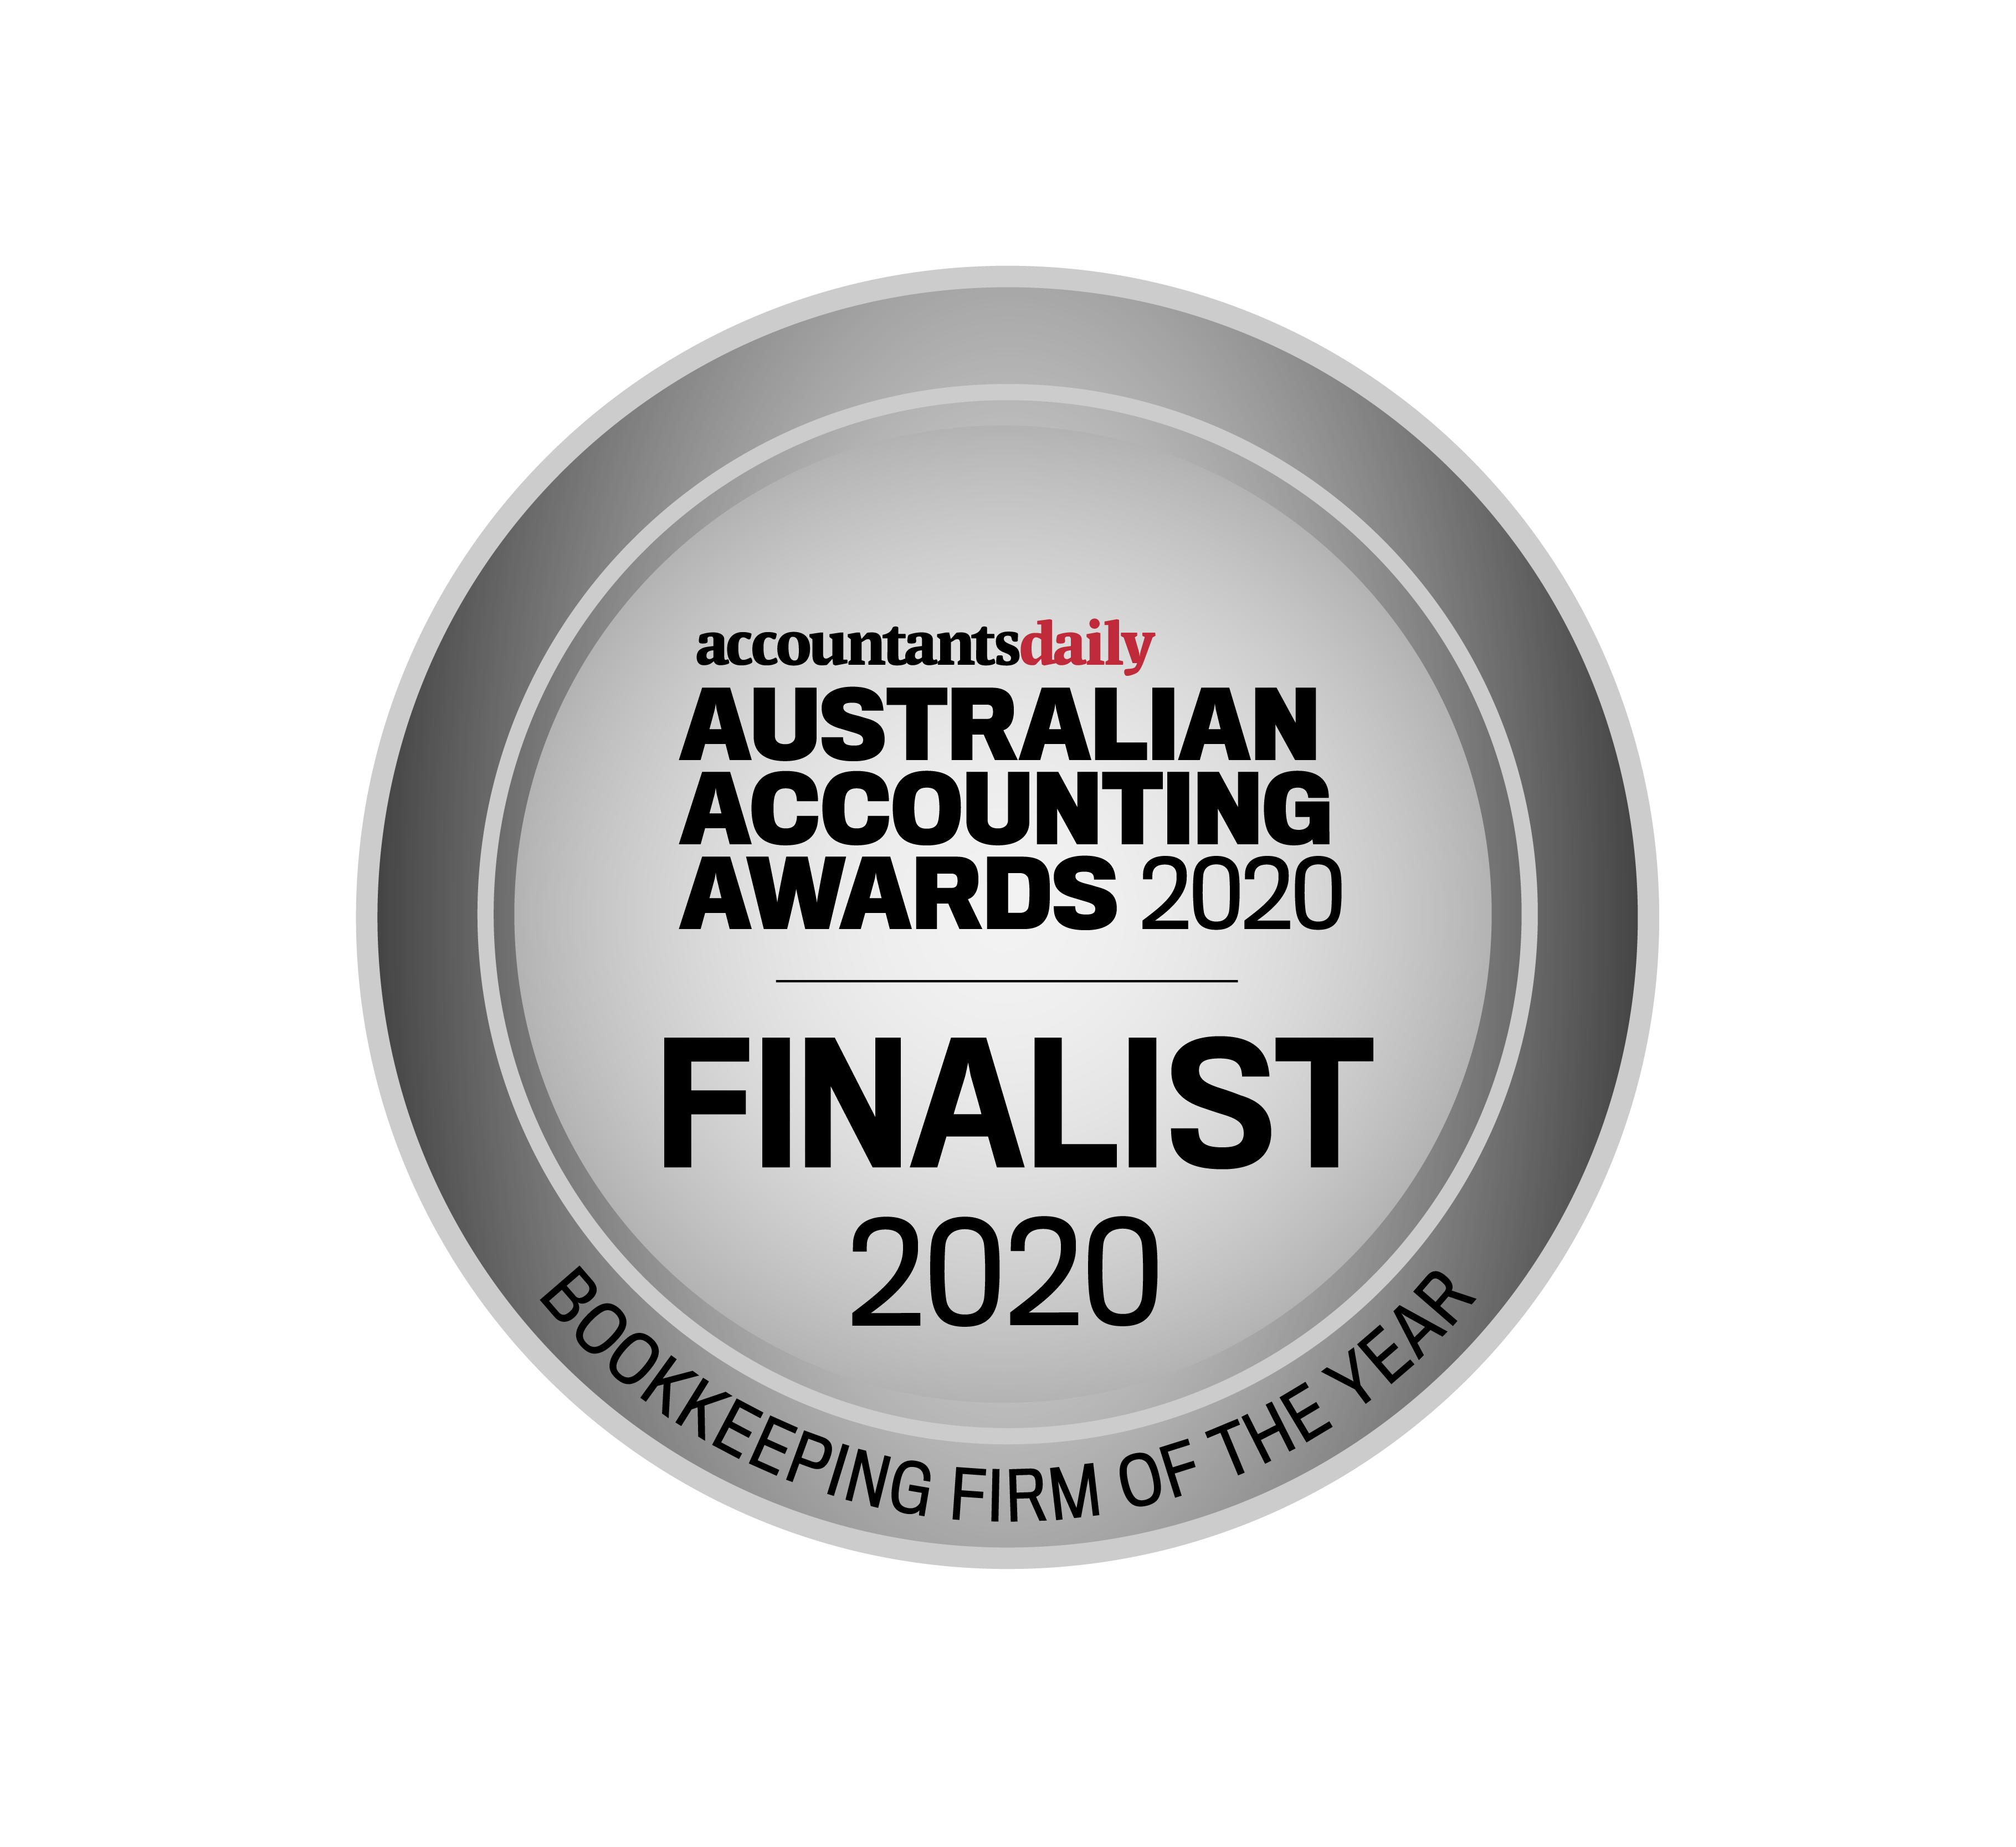 AAA20_seal_finalists_Bookkeeping Firm of the Year